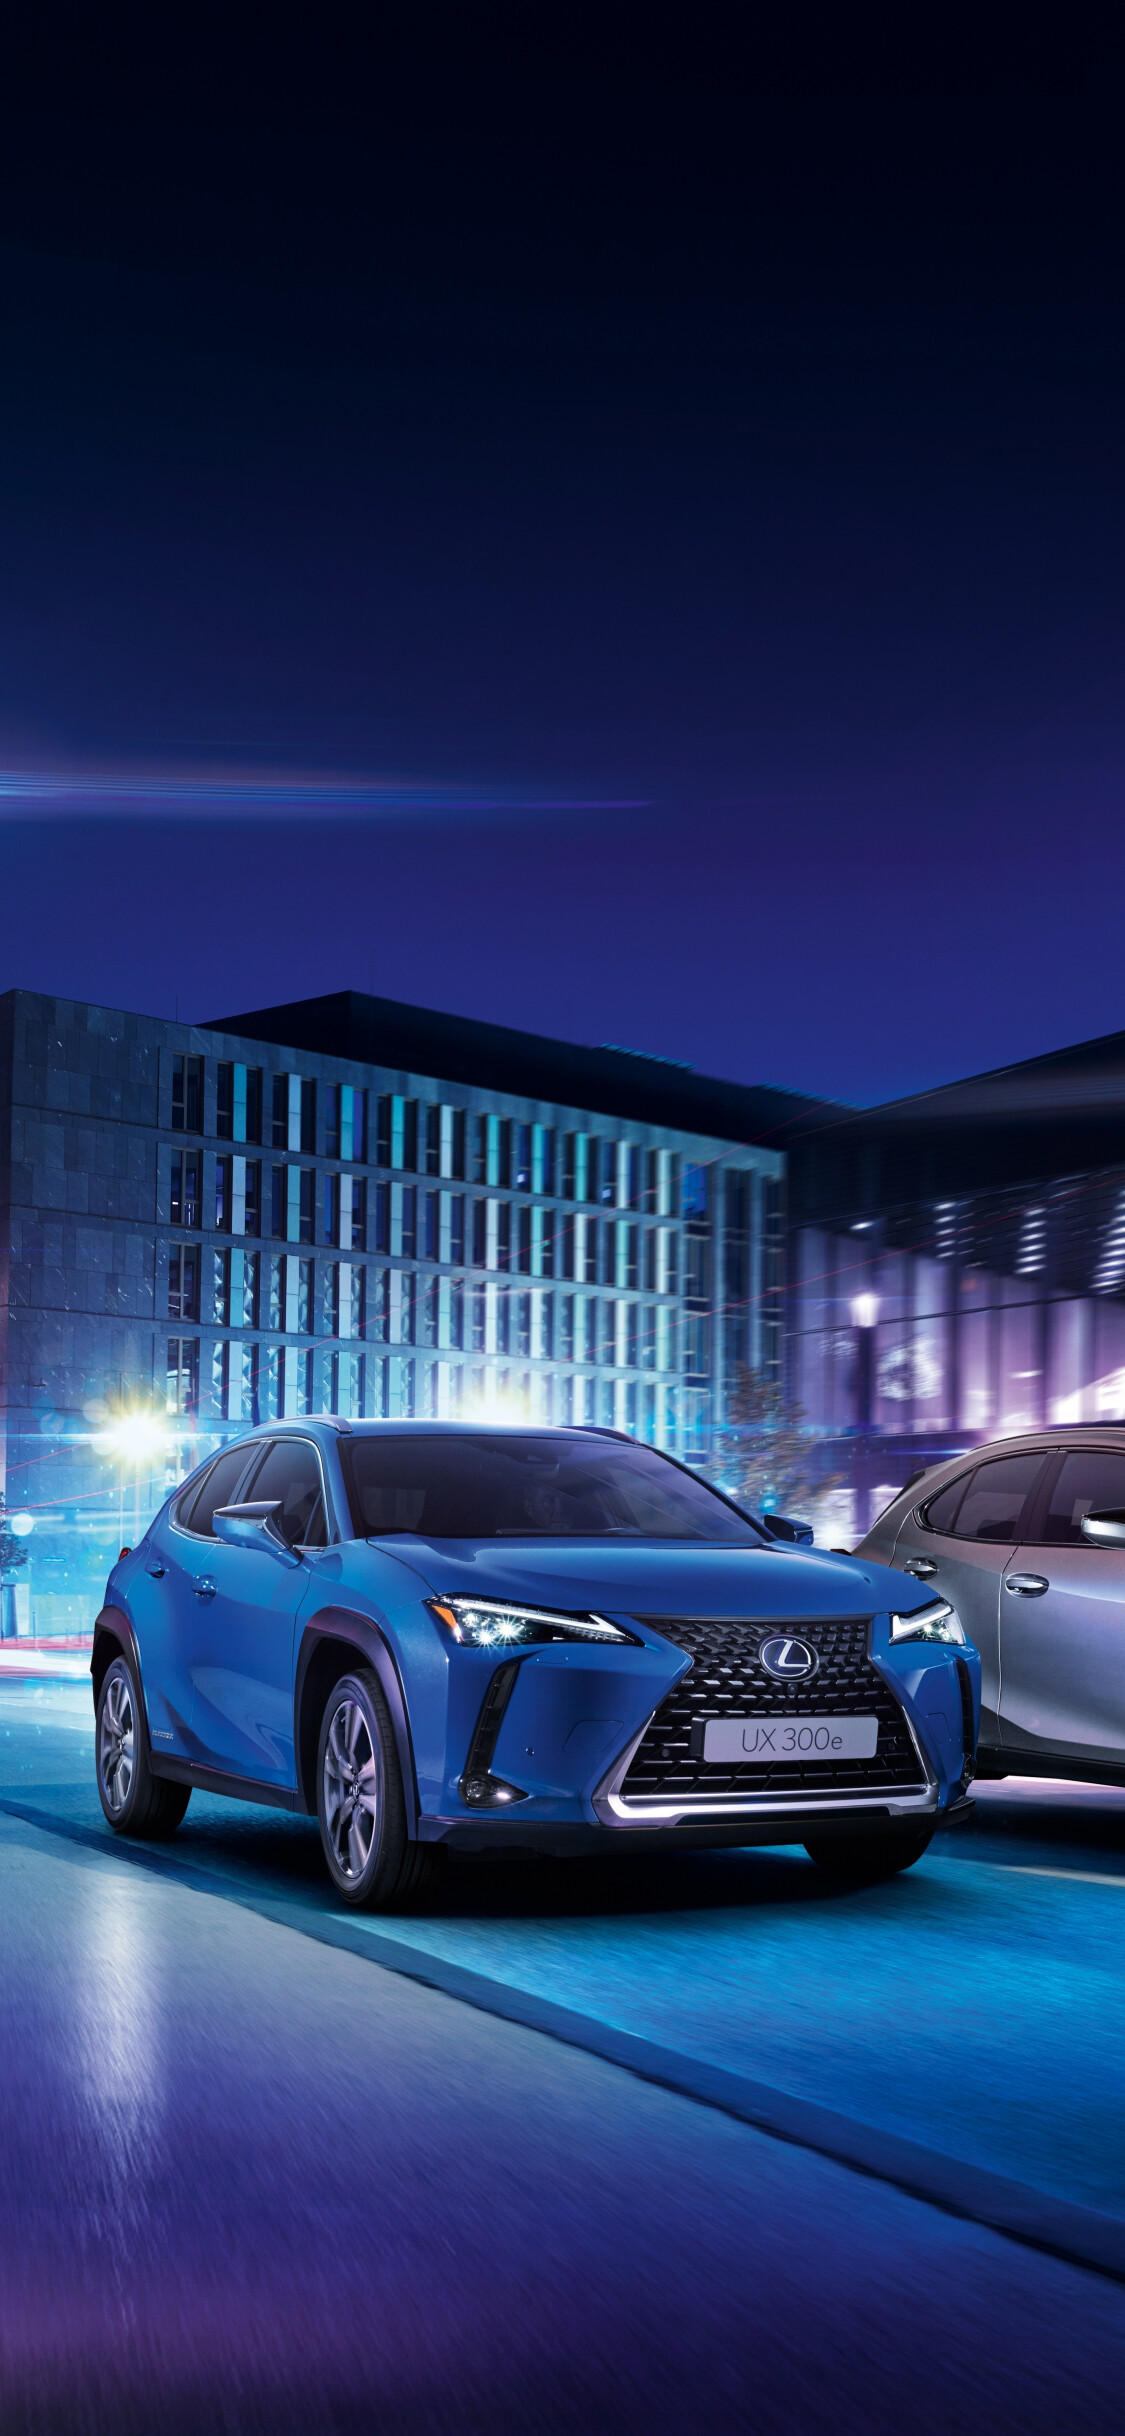 Lexus: Named the Best Overall Luxury Brand and Most Trusted Luxury Brand by Kelley Blue Book Brand Image Awards for 2017 and 2016. 1130x2440 HD Wallpaper.